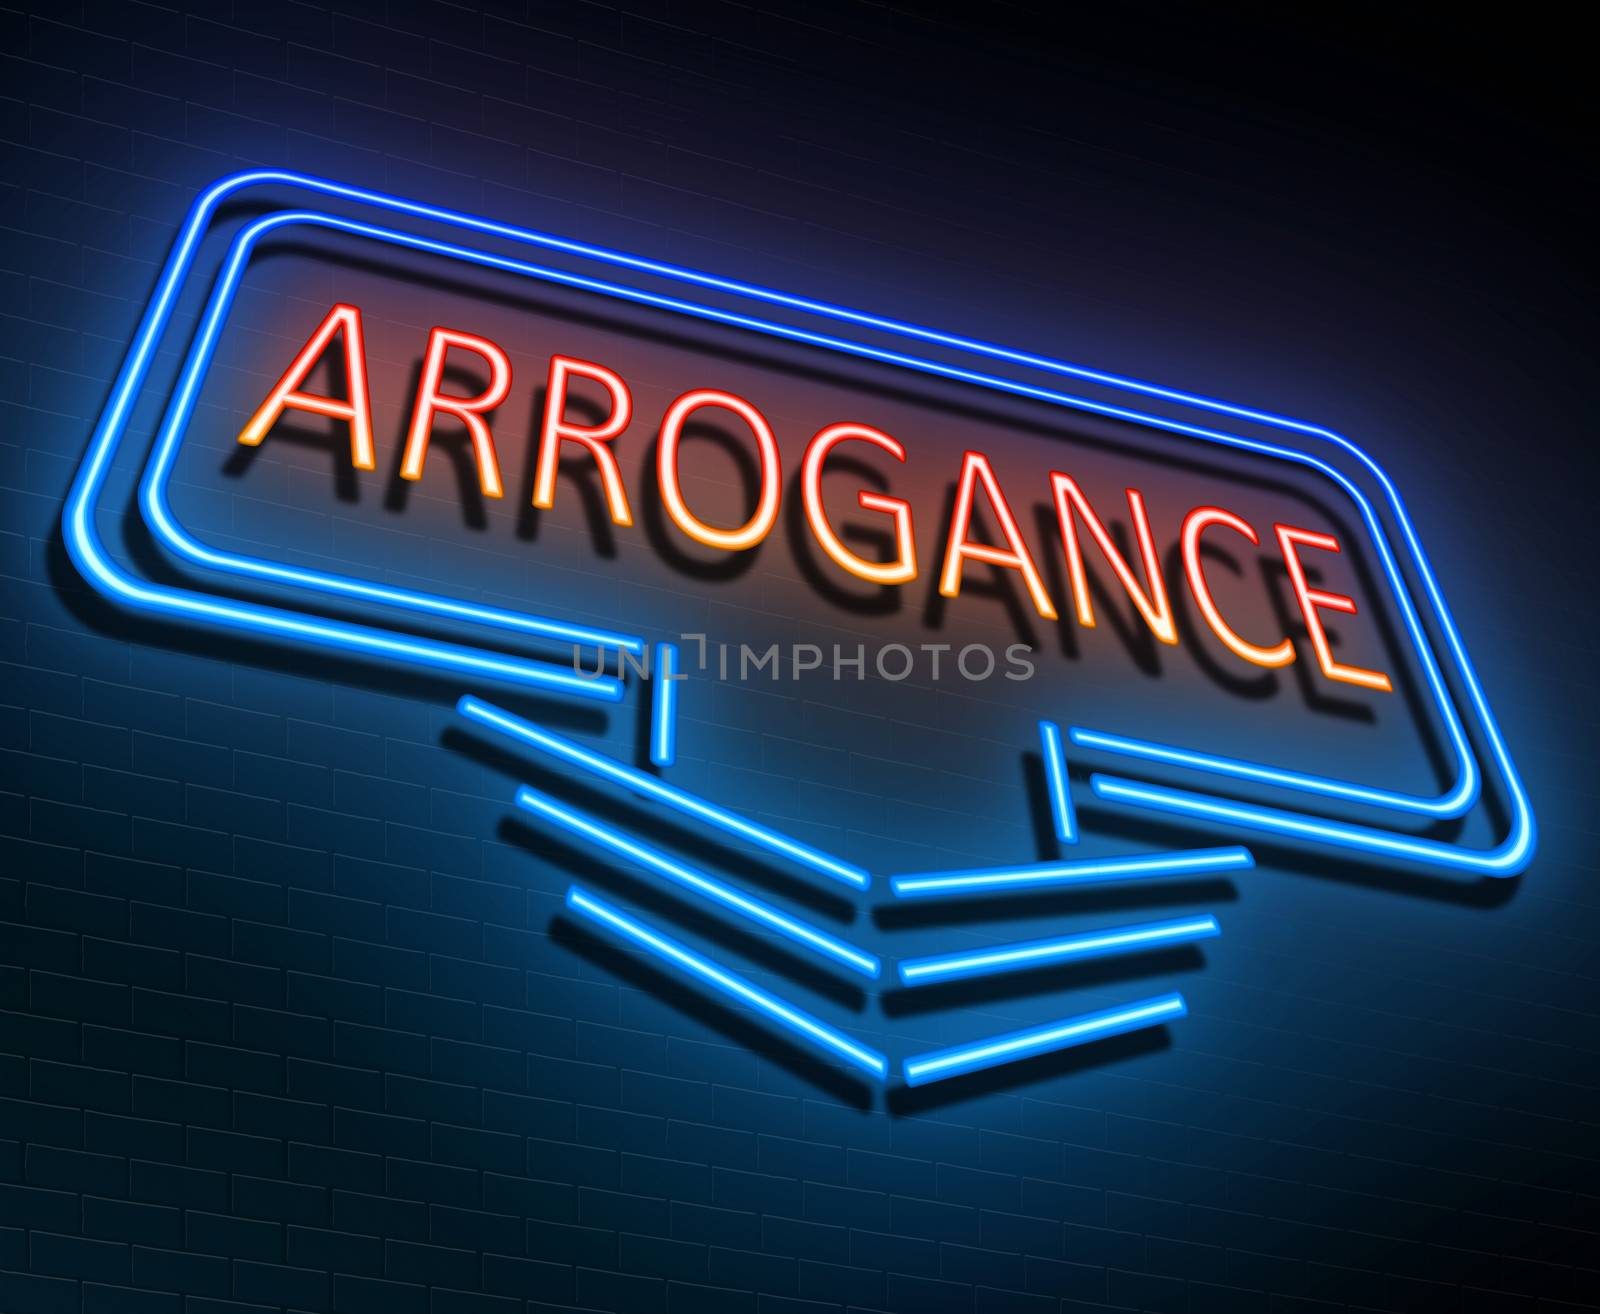 Illustration depicting an illuminated neon sign with an arrogance concept.